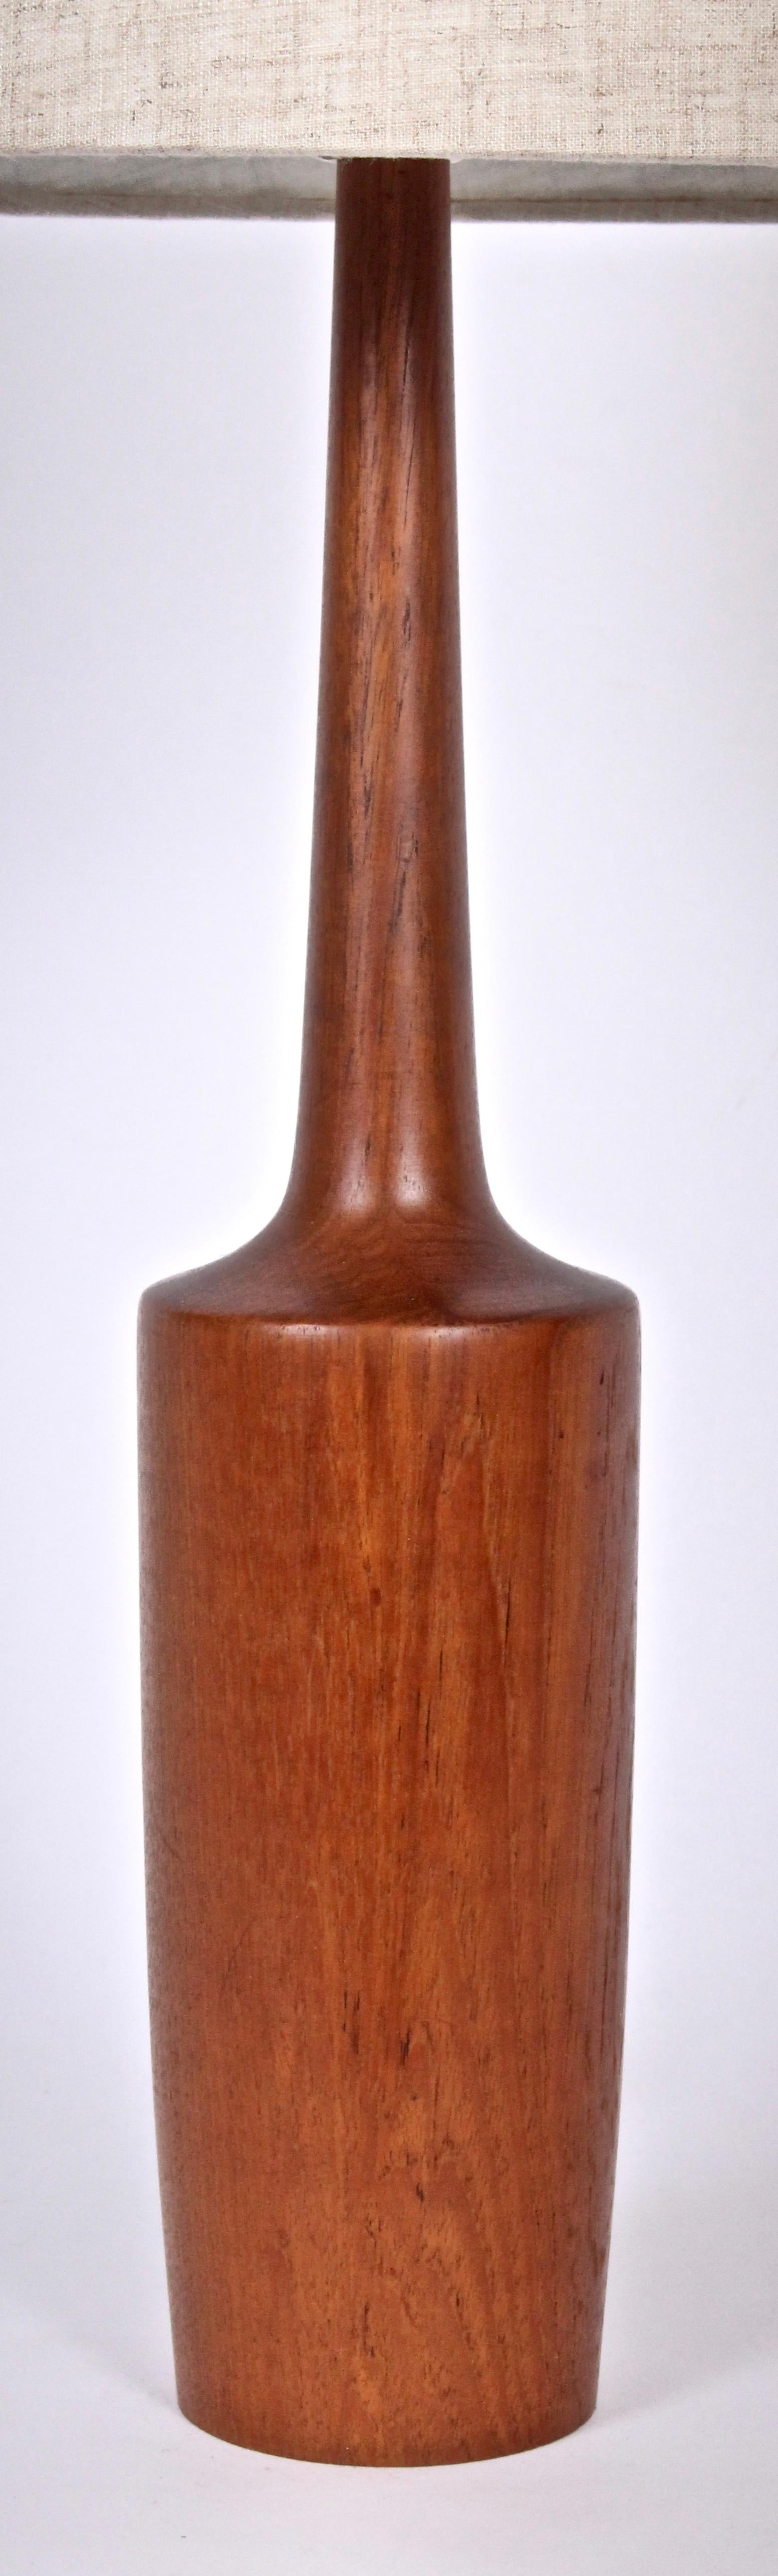 Slim Scandinavian Modern balanced solid teak table lamp, bedside lamp. Featuring a vividly grained, slender, bowling pin form utilizing a single piece of teak. Small footprint. 20H to top of socket. Teak 17H. Shade shown for display only (9 H x 11 D